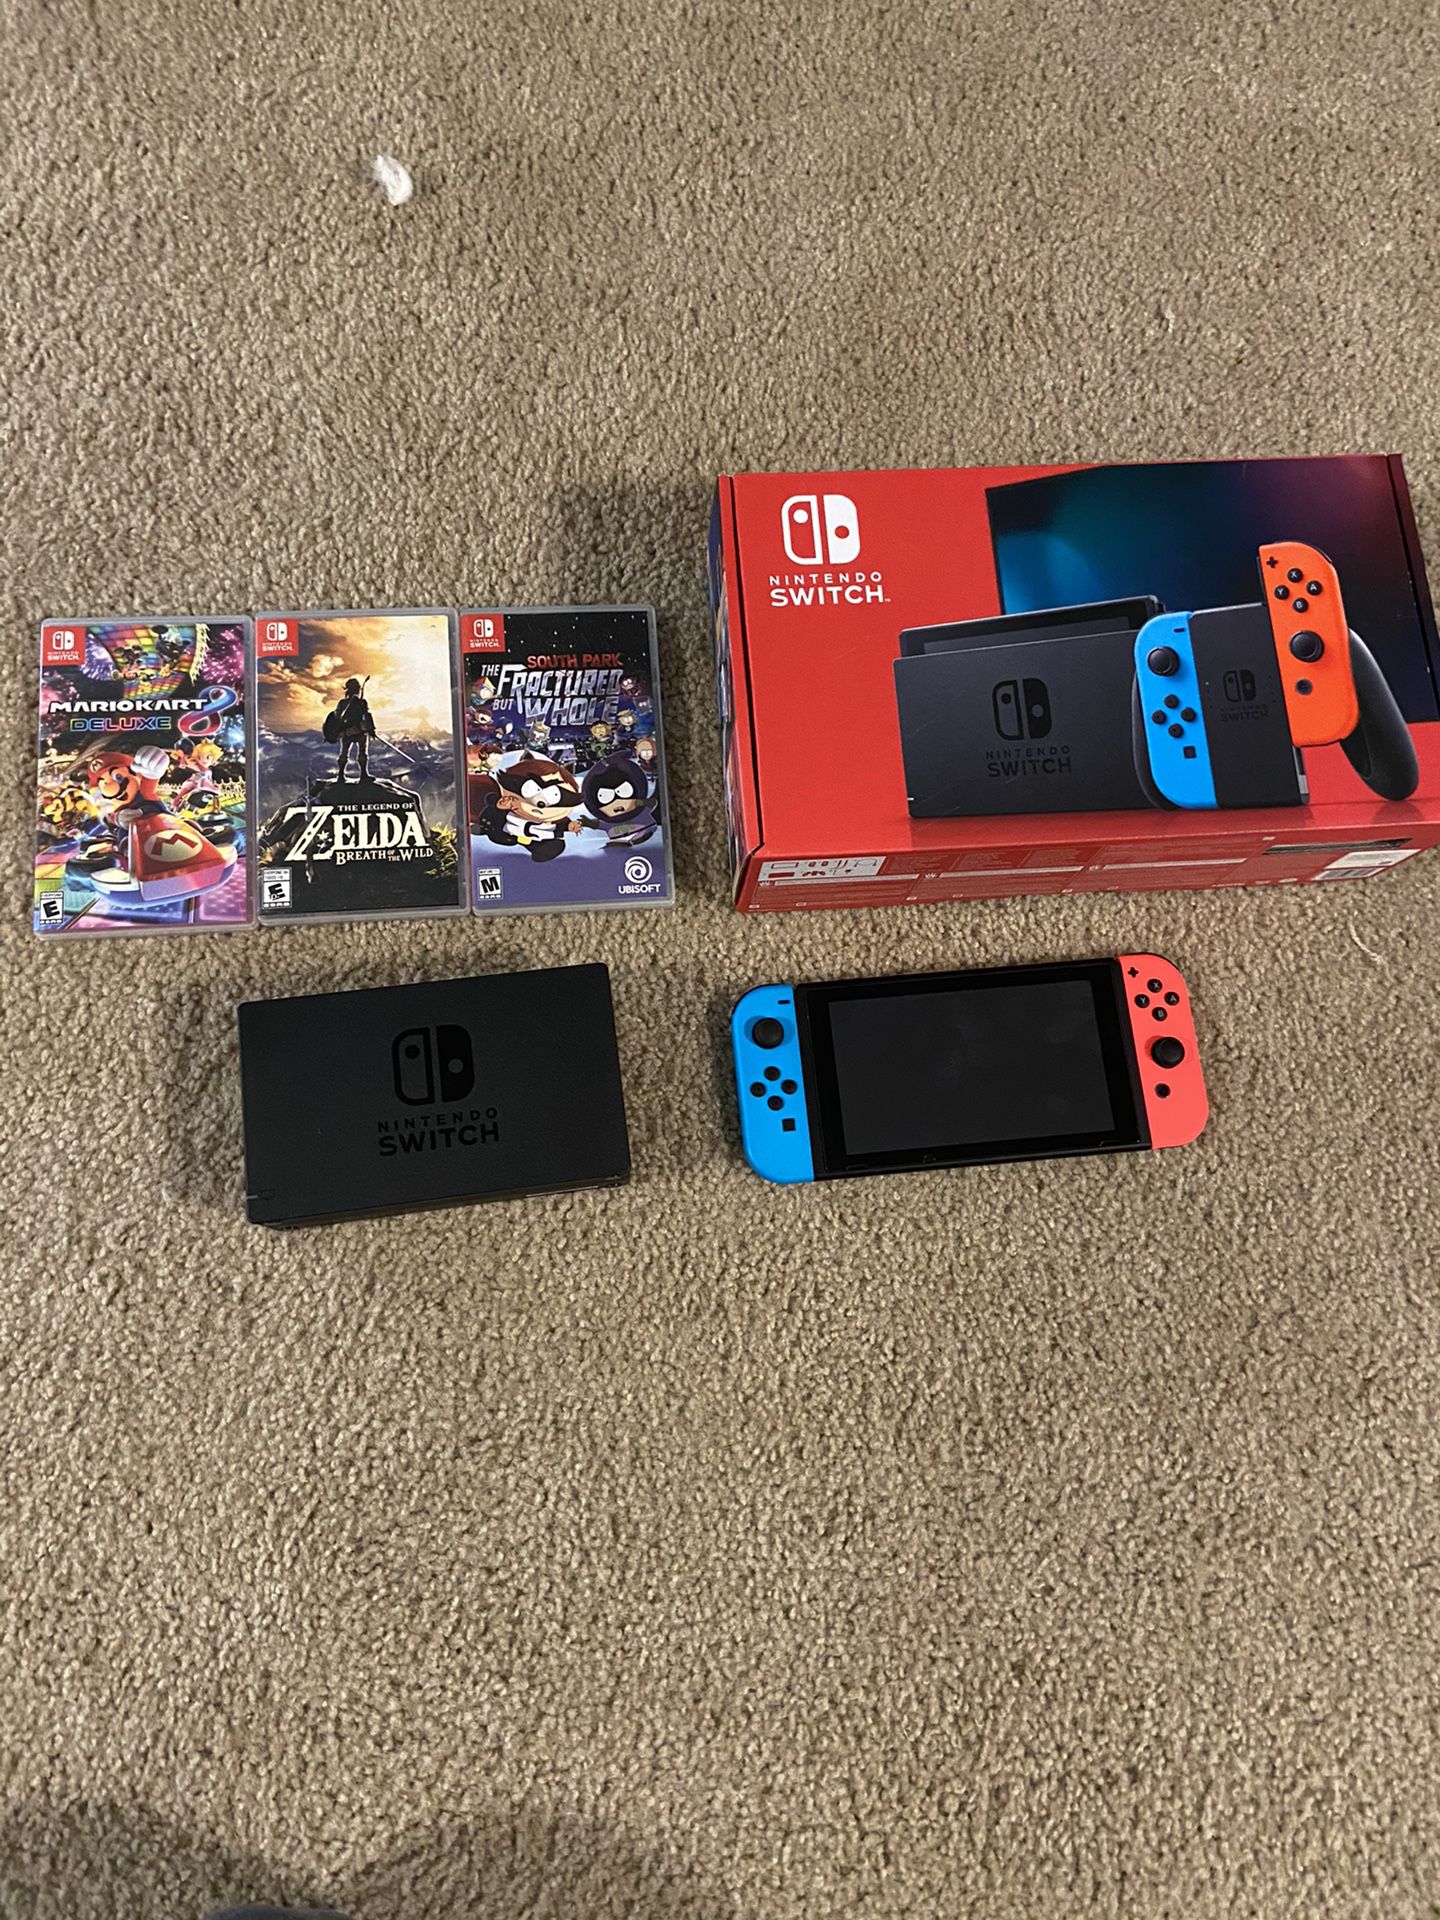 Nintendo switch w/ games and accessories